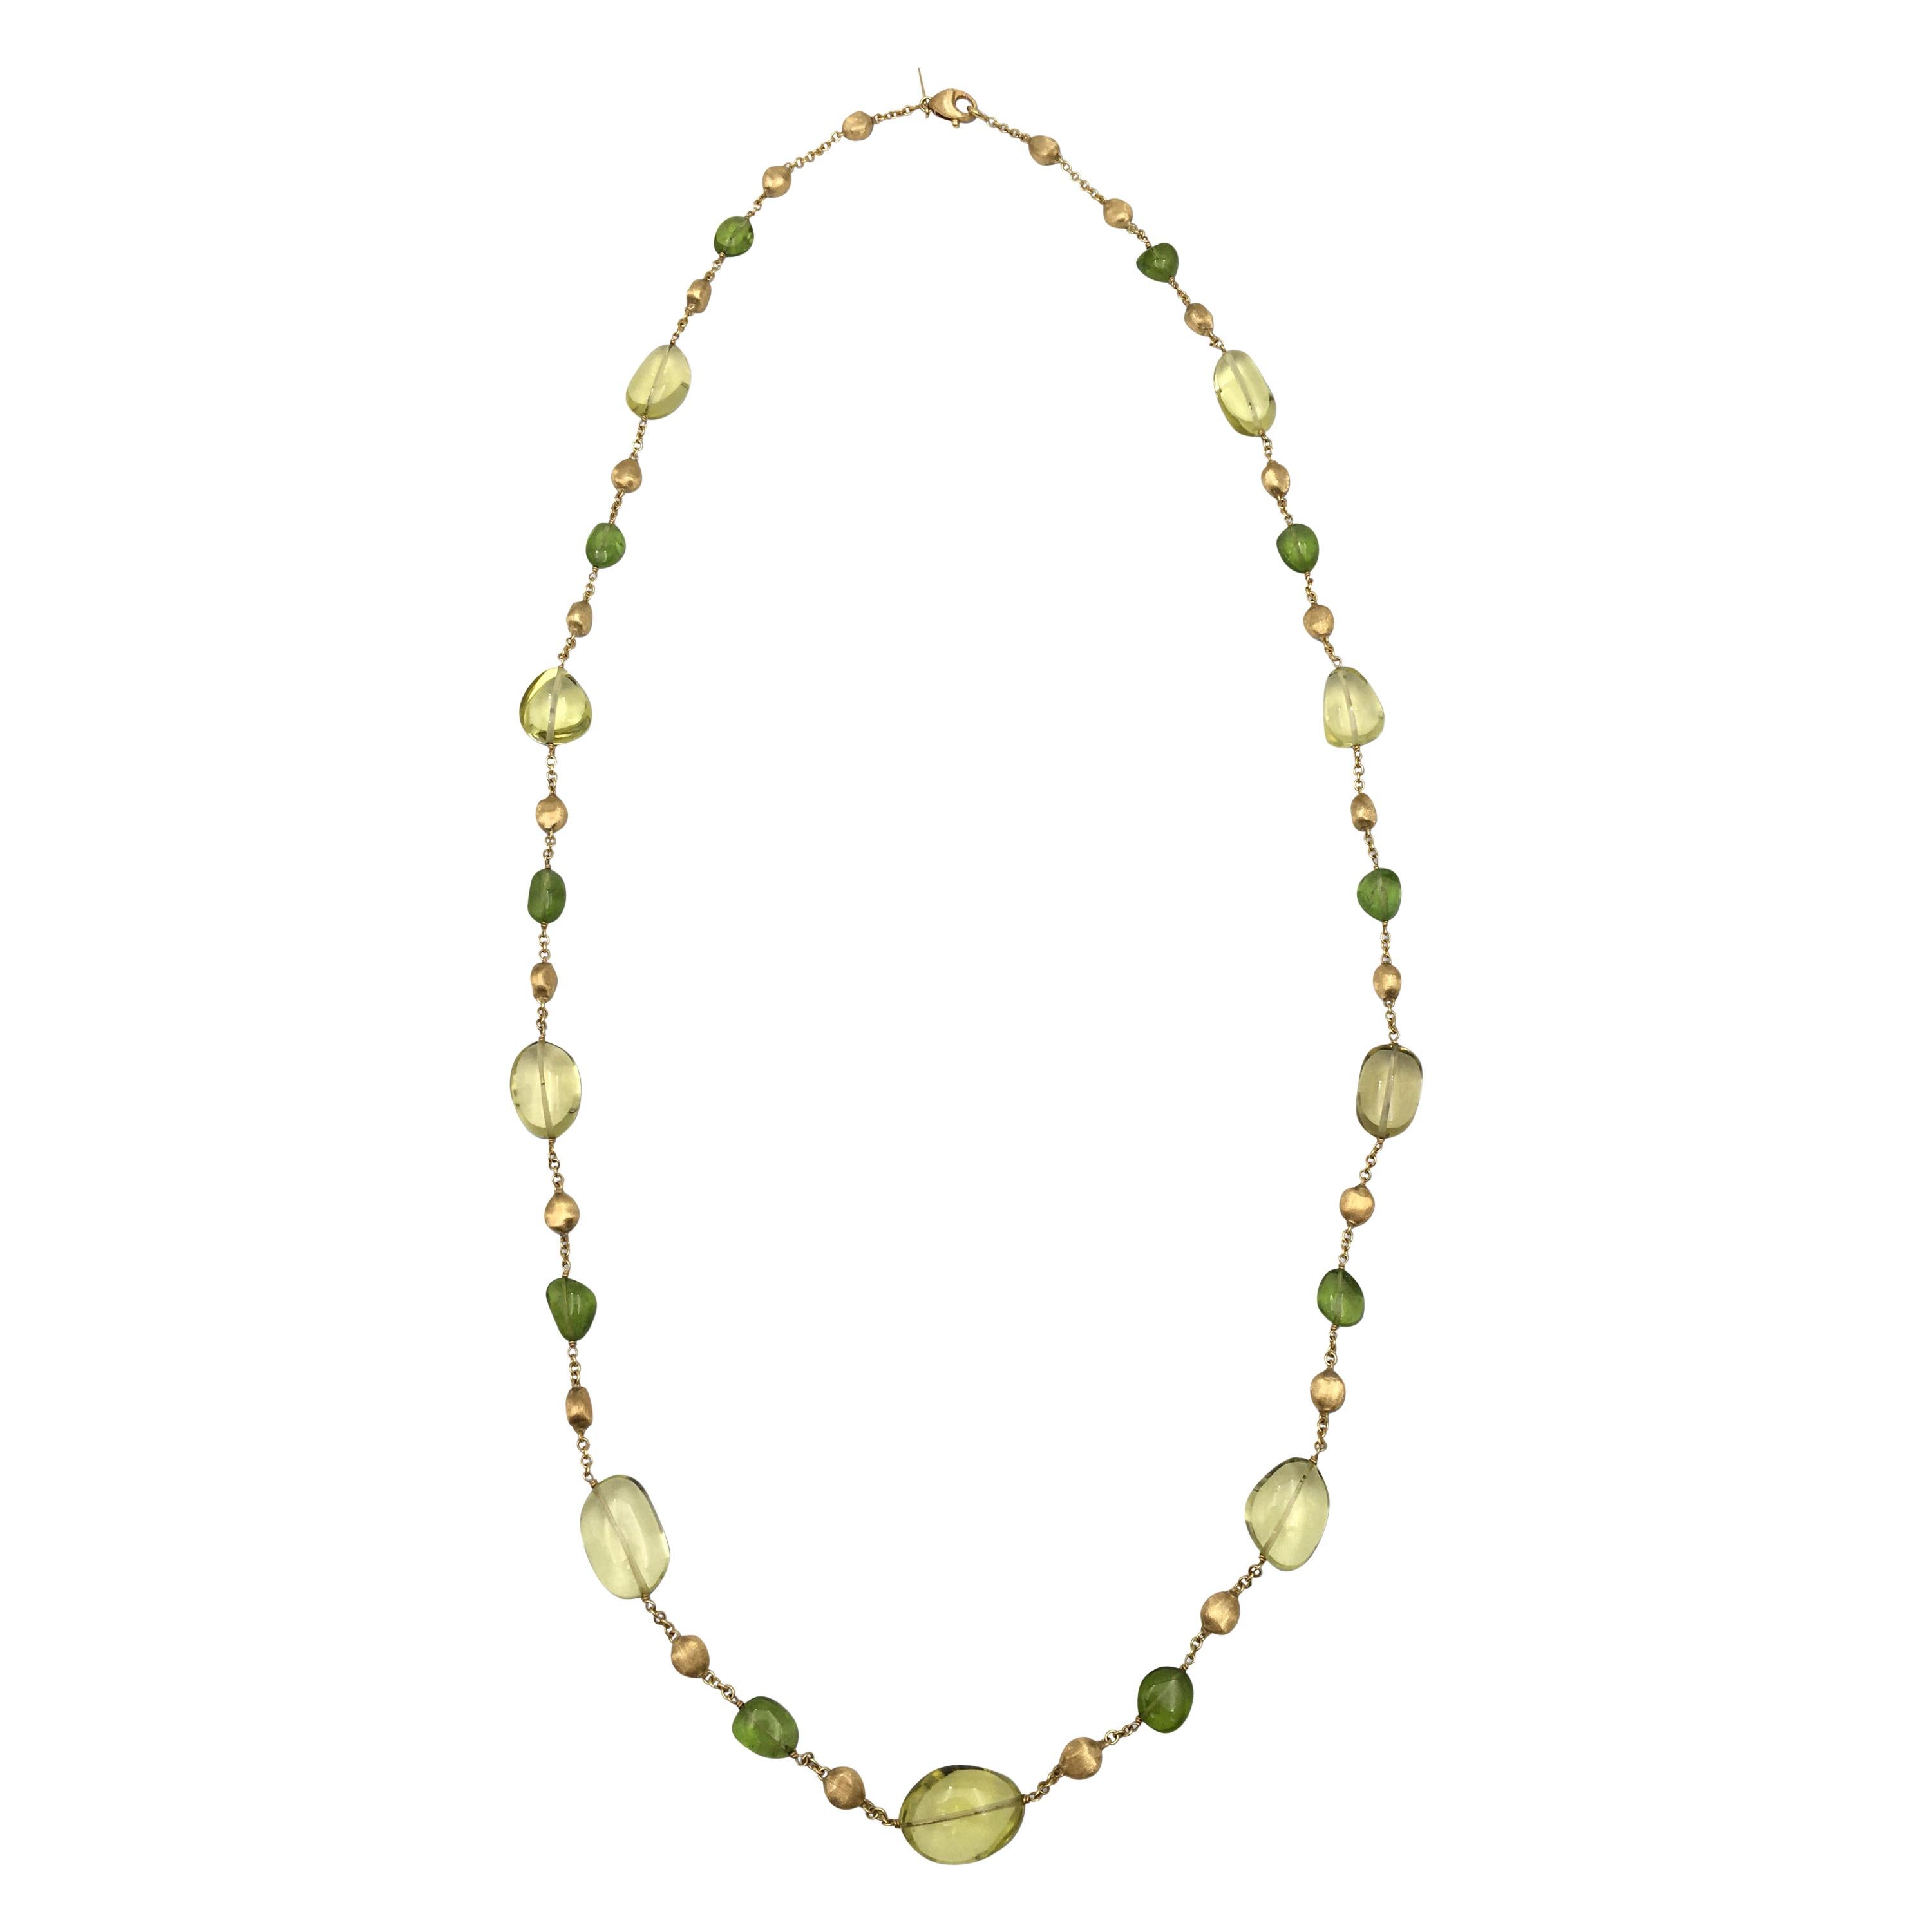 Marco Bicego 18 Karat Gold Citrine and Peridot Necklace